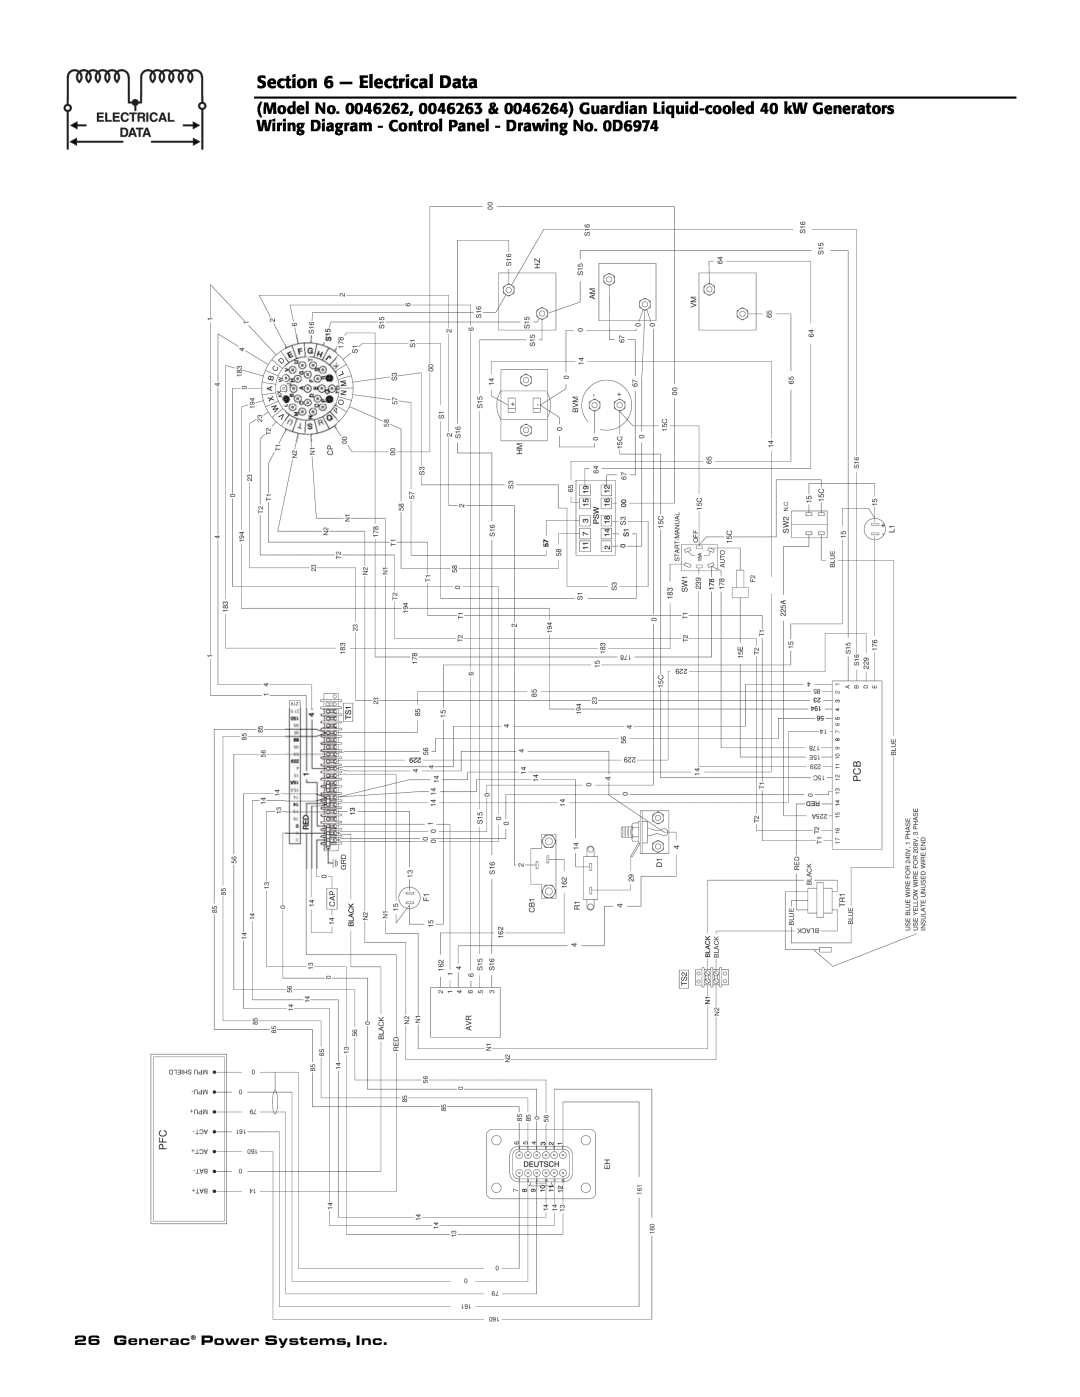 Generac Power Systems 43734 Electrical Data, Wiring Diagram - Control Panel, Model No. 0046262, 0046264, DrawingNo 